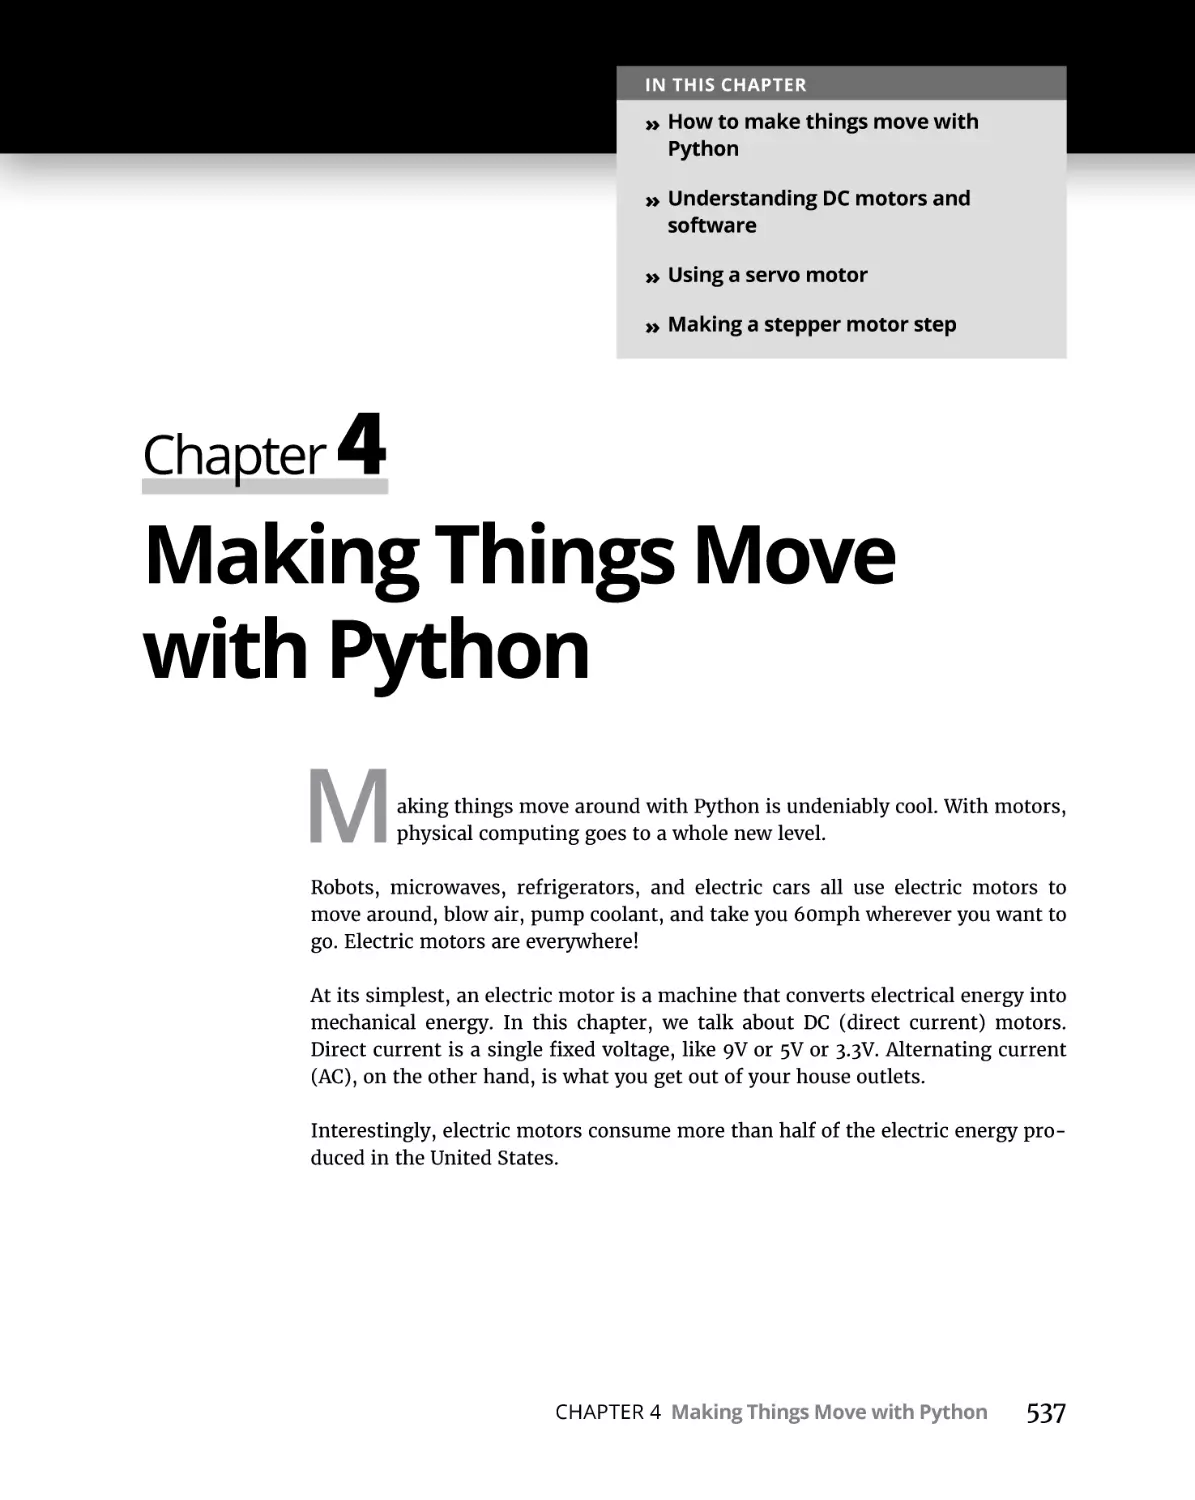 Chapter 4 Making Things Move with Python